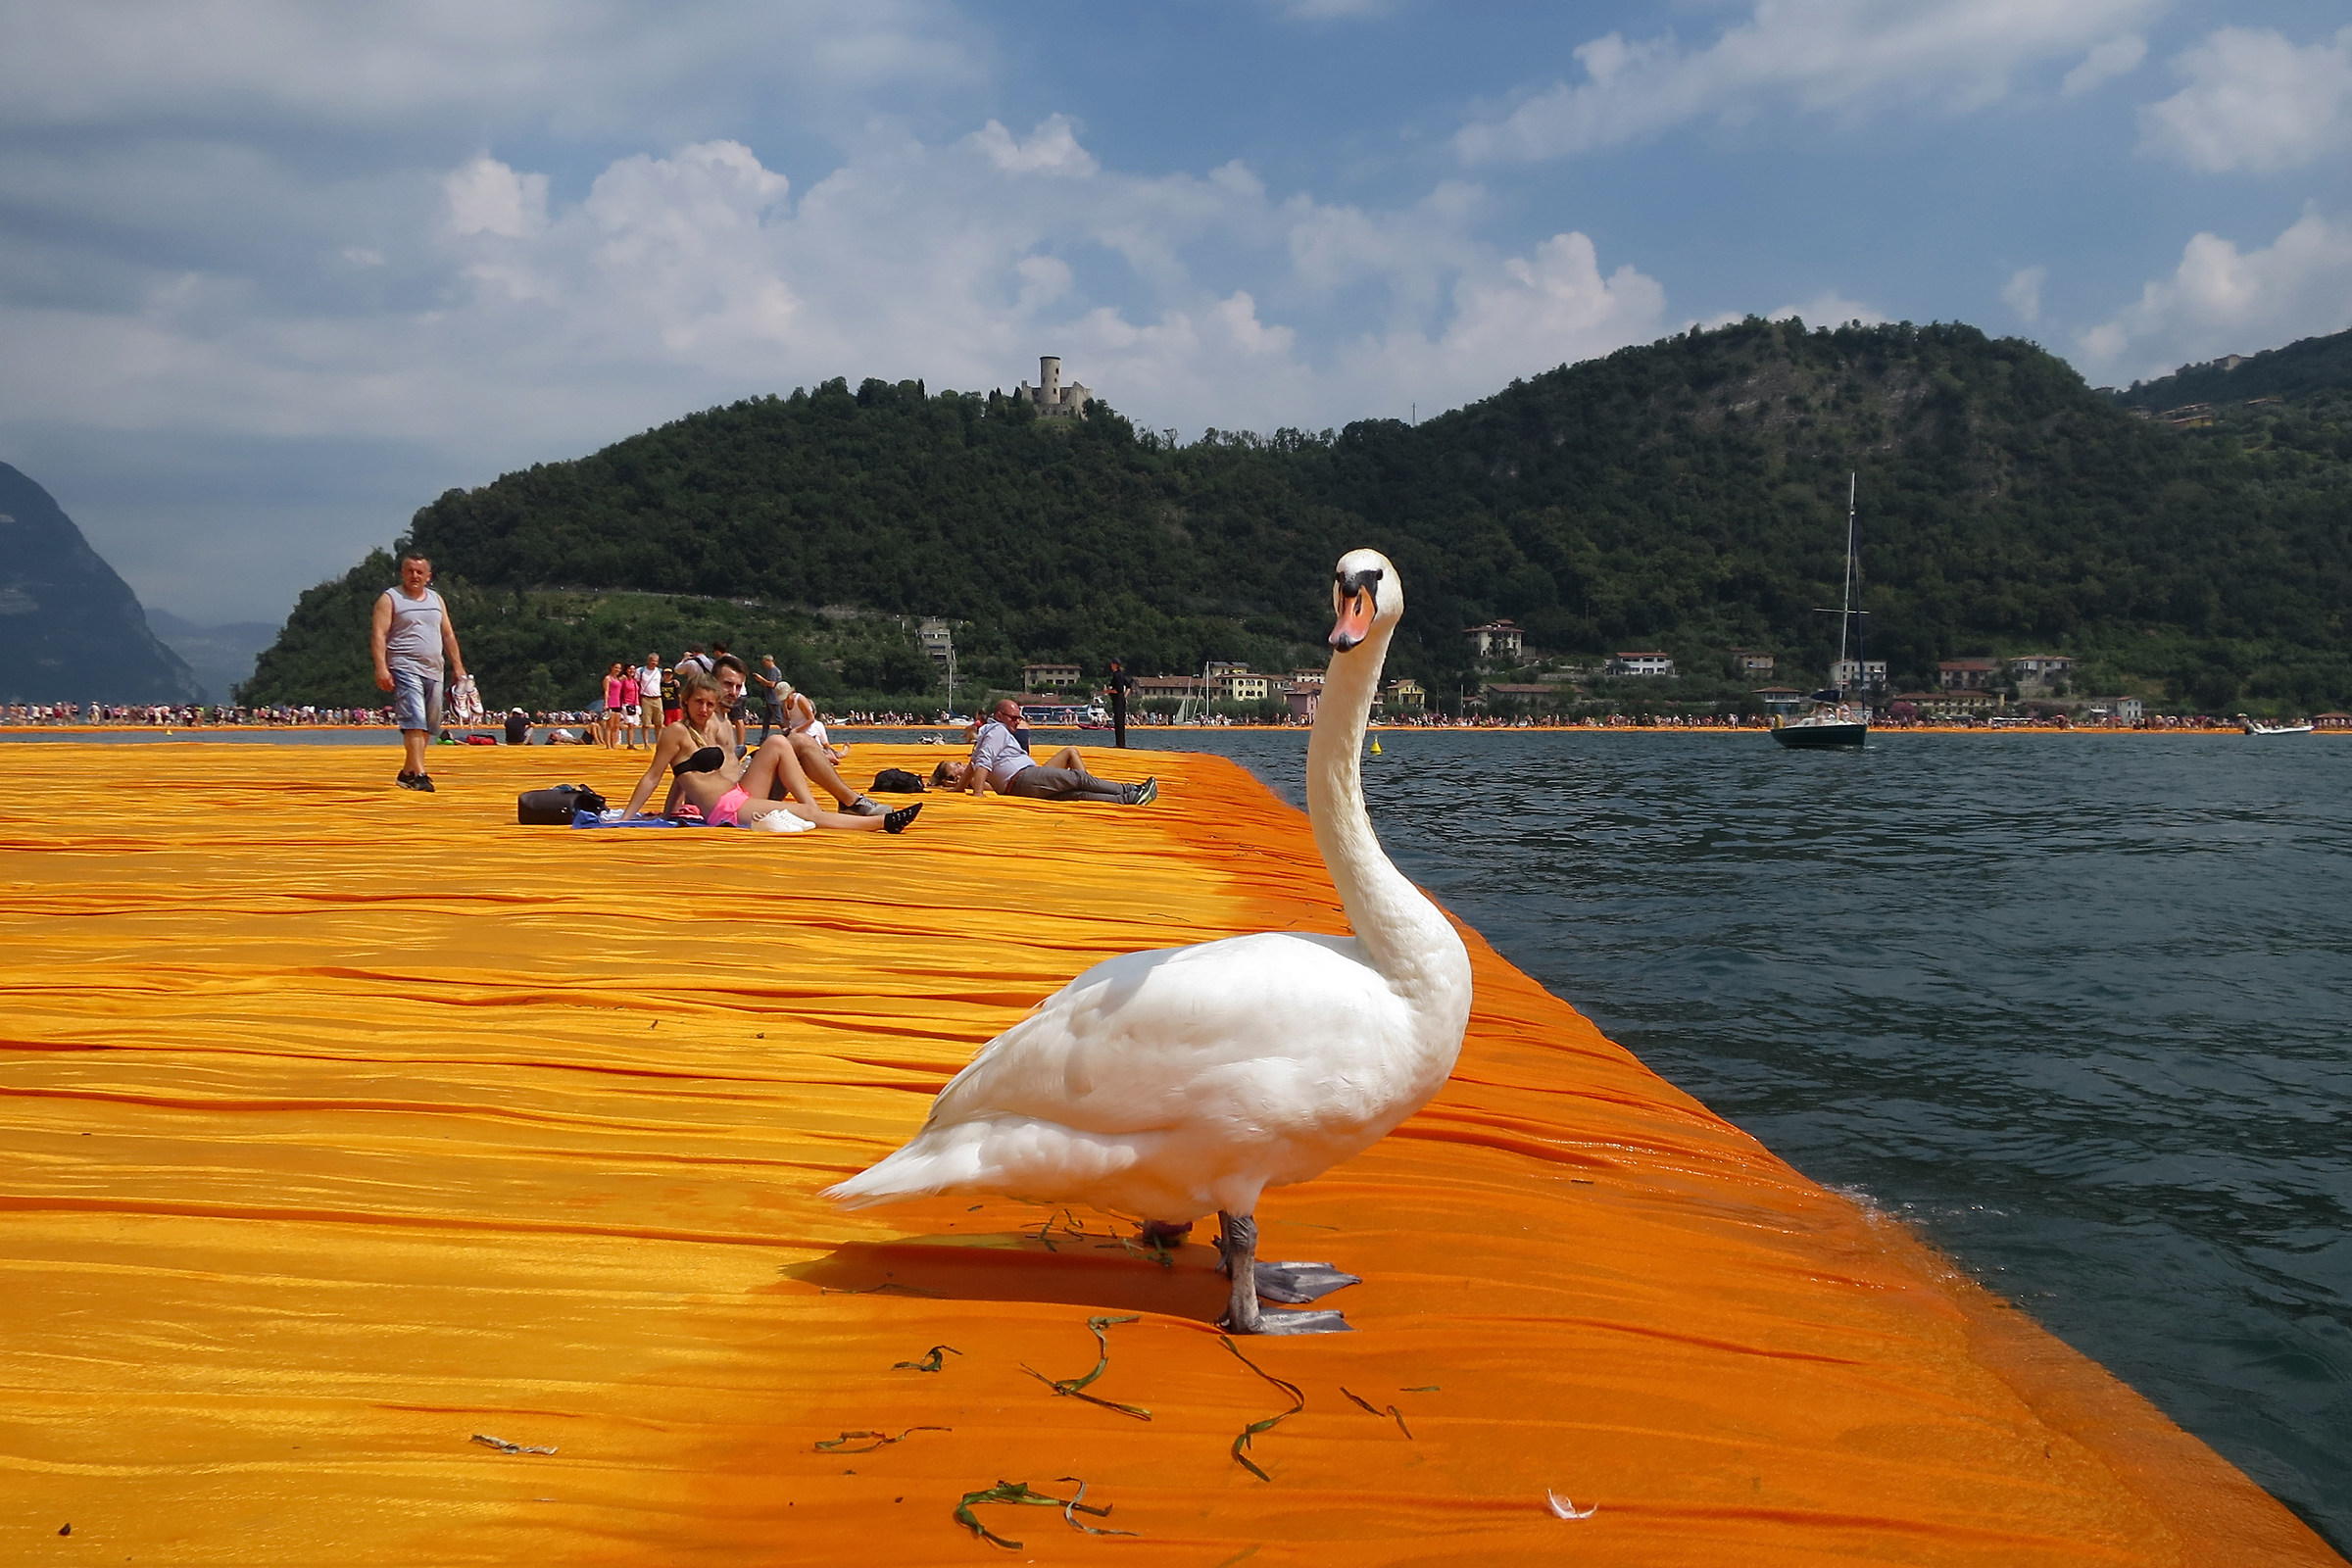 Floating piers, find the intruder....